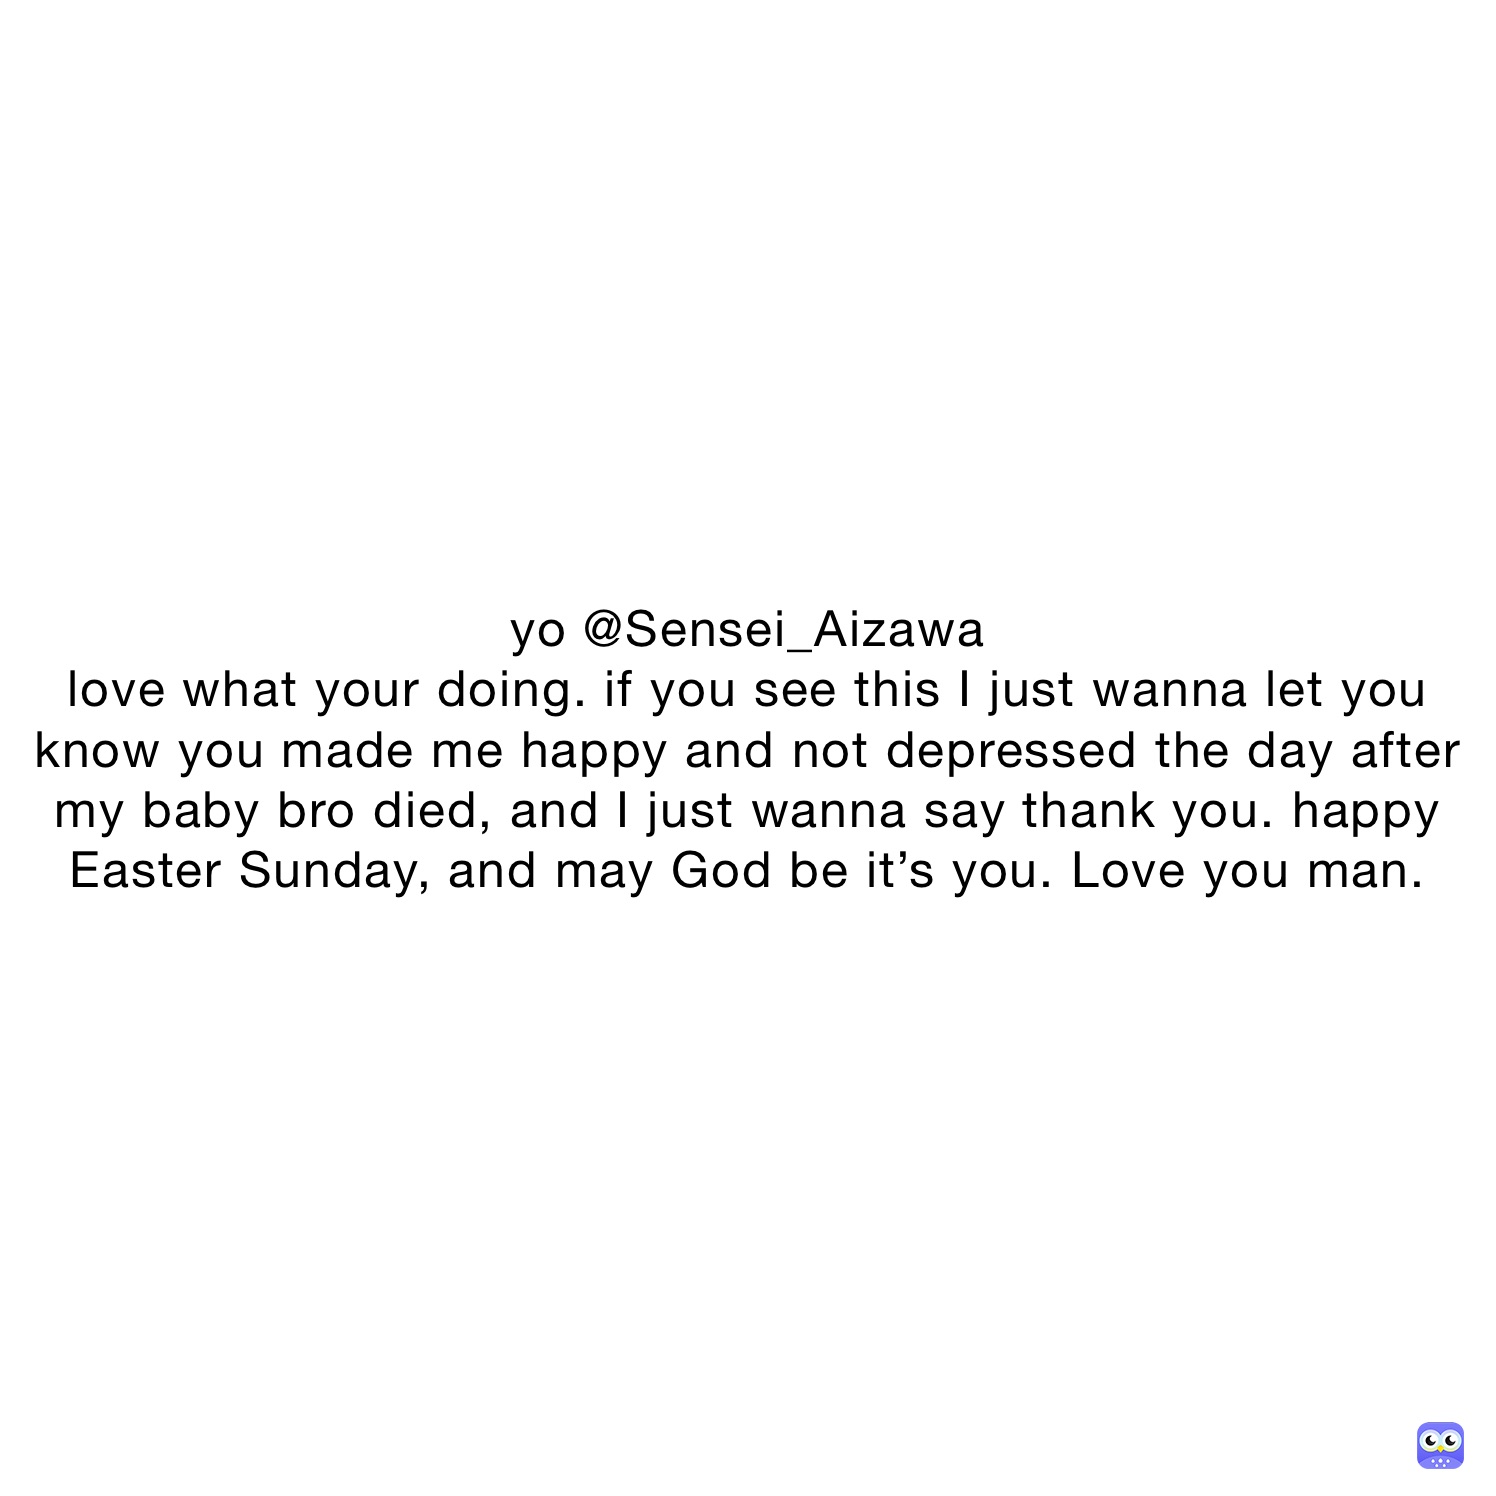 yo @Sensei_Aizawa
love what your doing. if you see this I just wanna let you know you made me happy and not depressed the day after my baby bro died, and I just wanna say thank you. happy Easter Sunday, and may God be it’s you. Love you man.